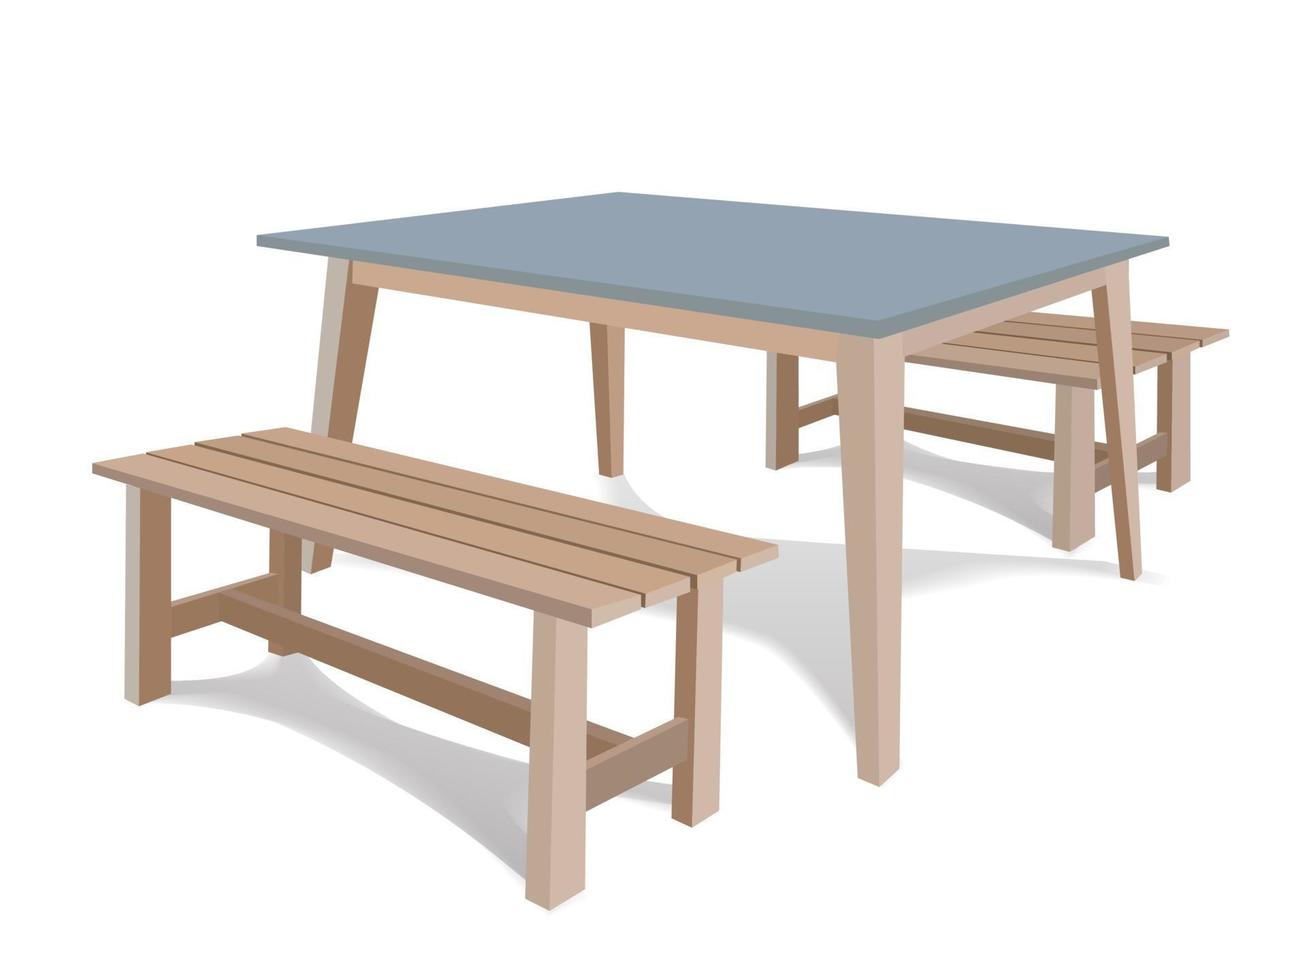 Wooden Table Set on illustration graphic vector